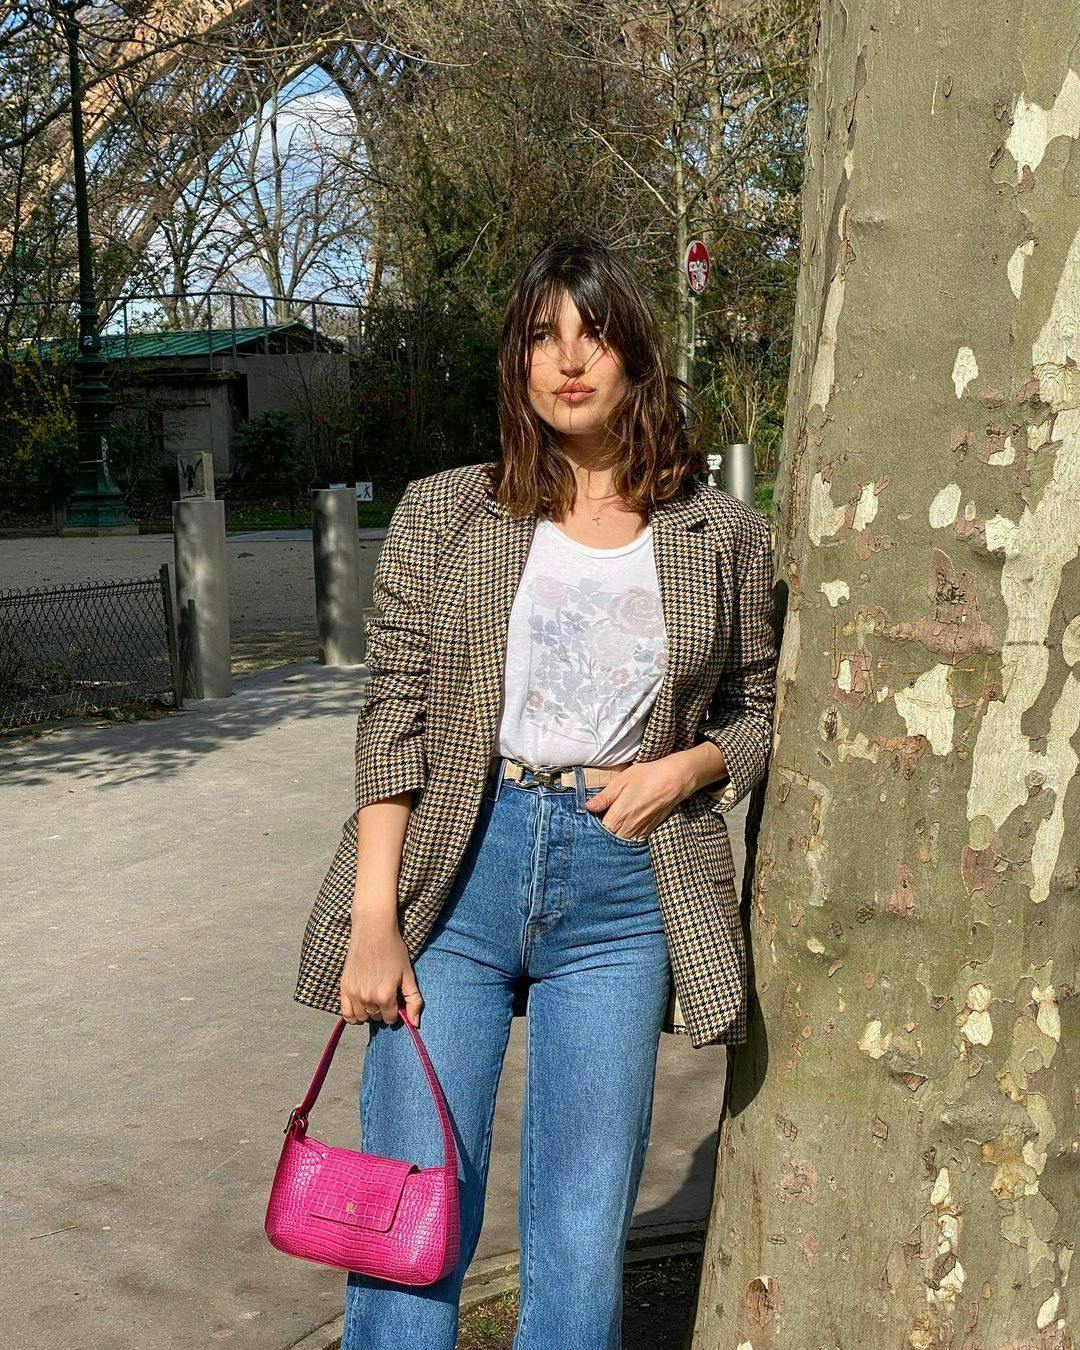 Jeanne Damas in jeans, a white t-shirt, a patterned blazer, and holds a bright pink bag.